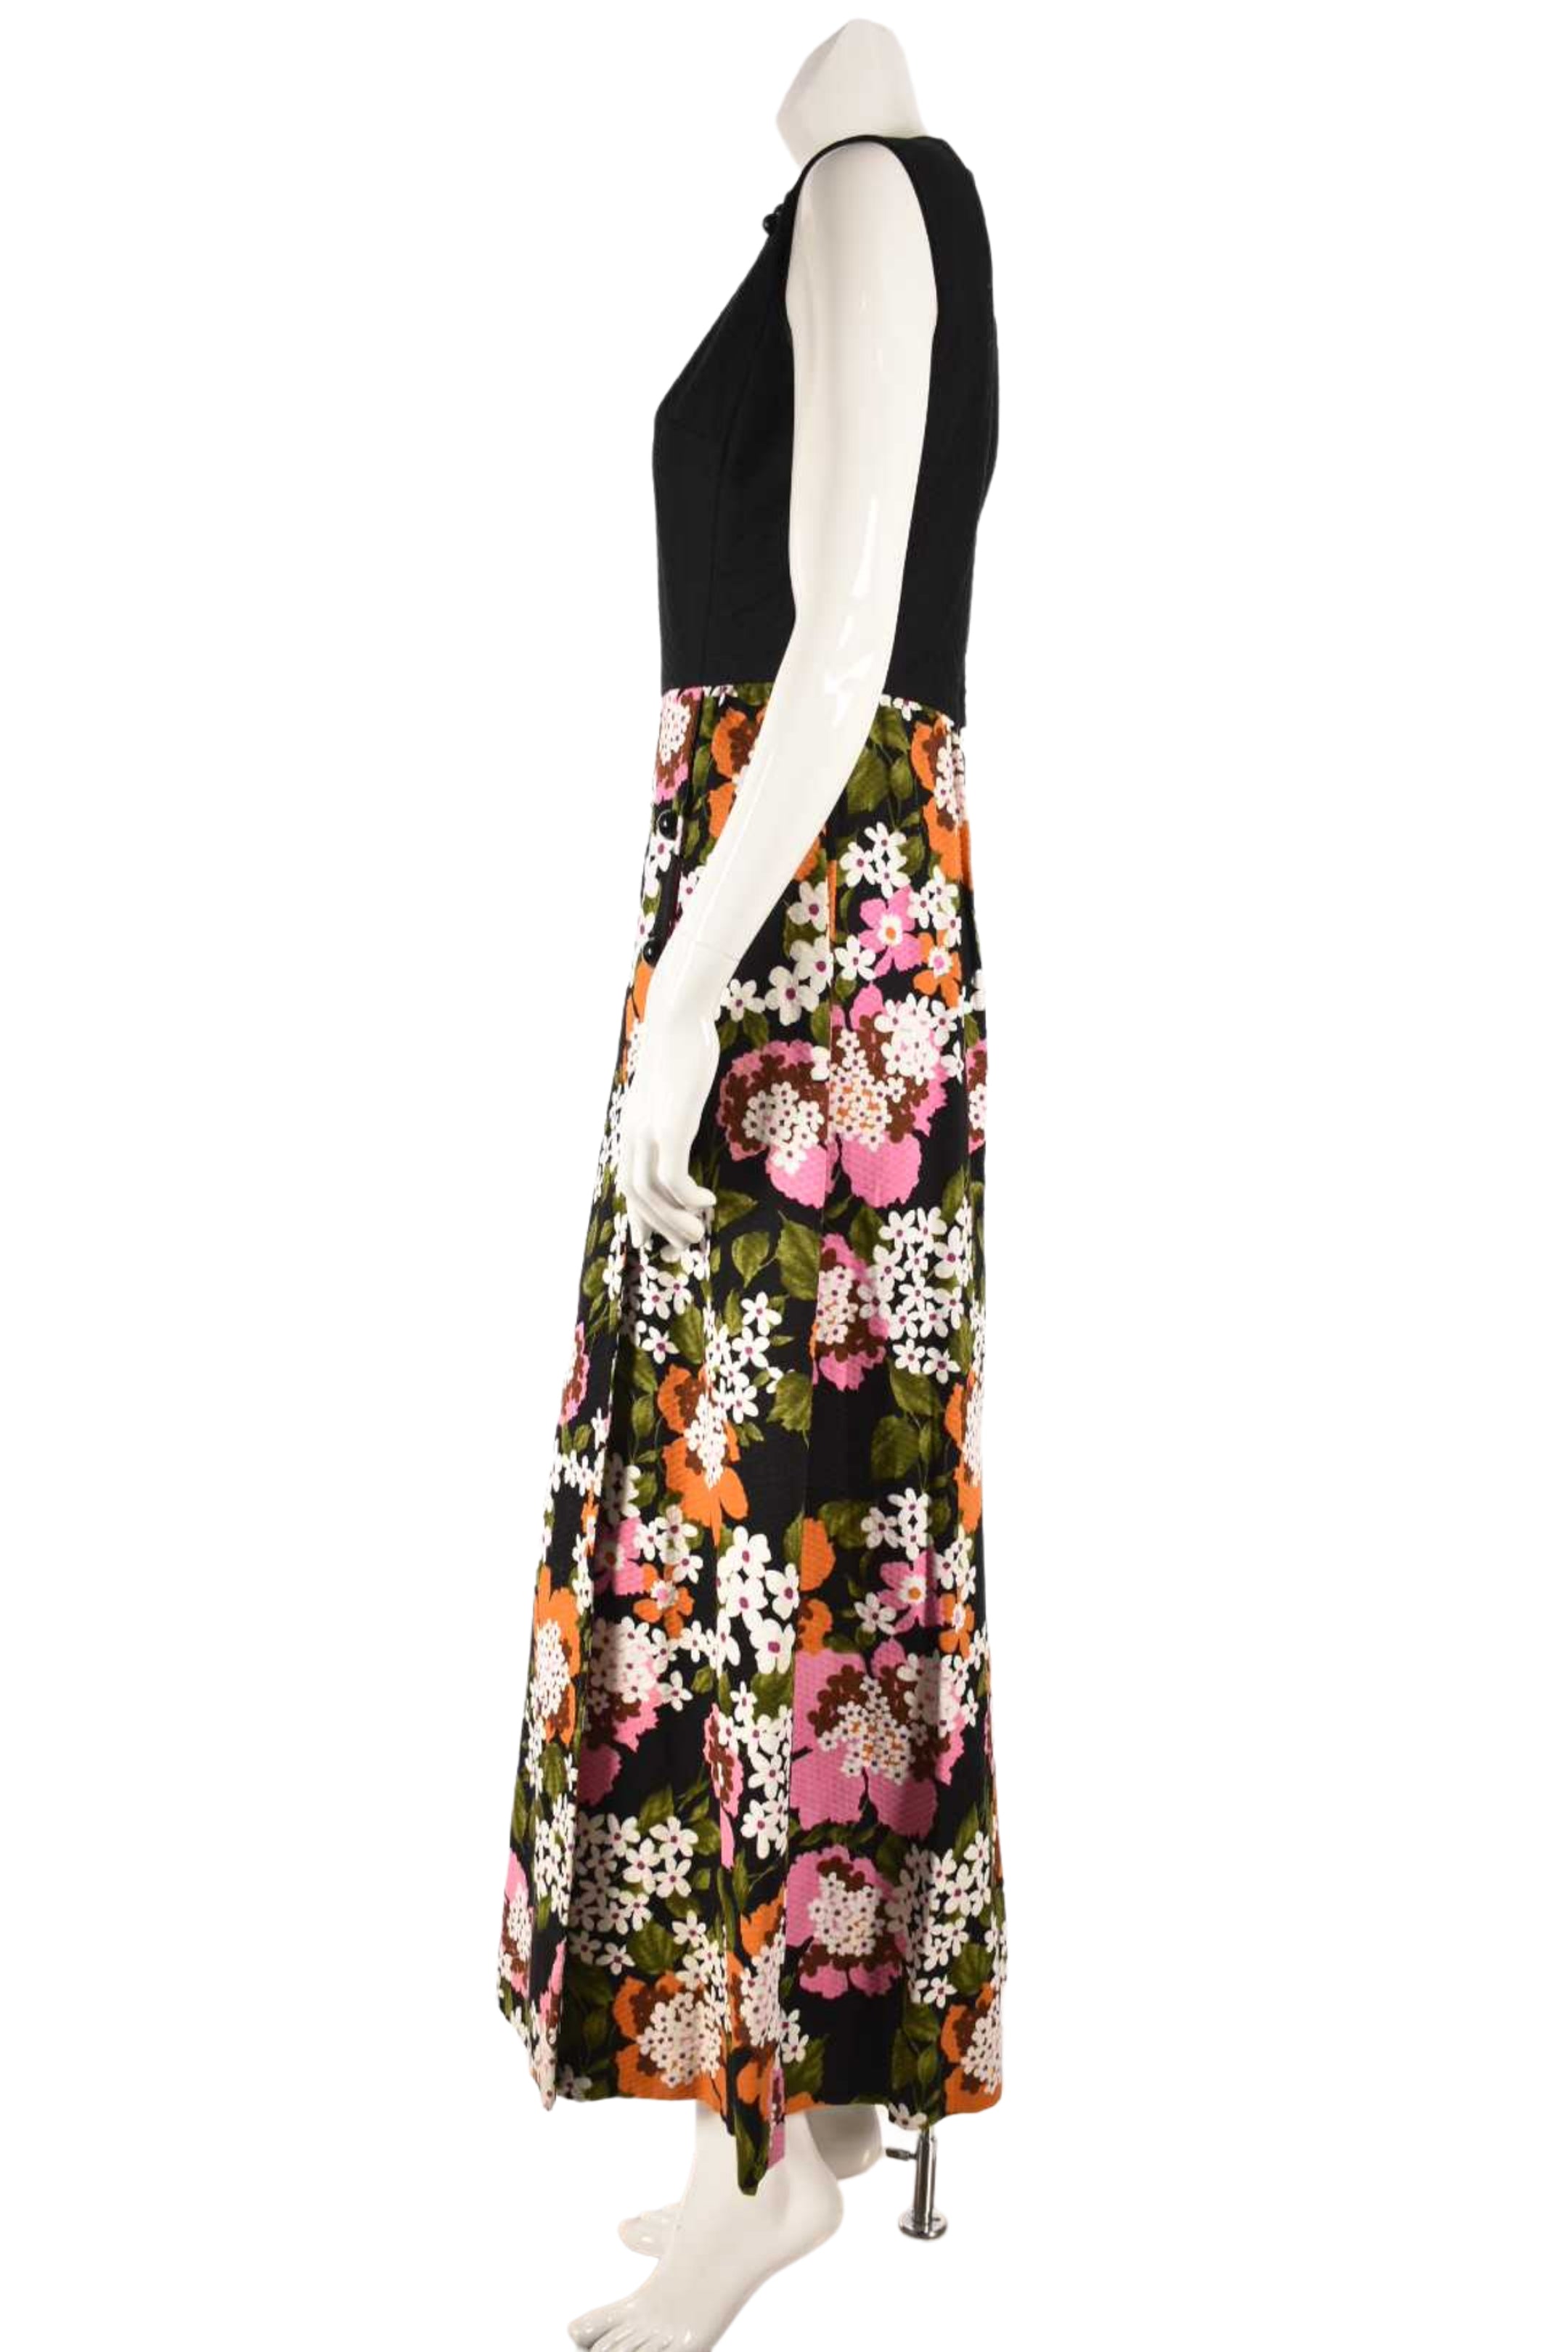 1970s DAYMOR COUTURE Black Floral Palm Royale Gown 4/6 Canada